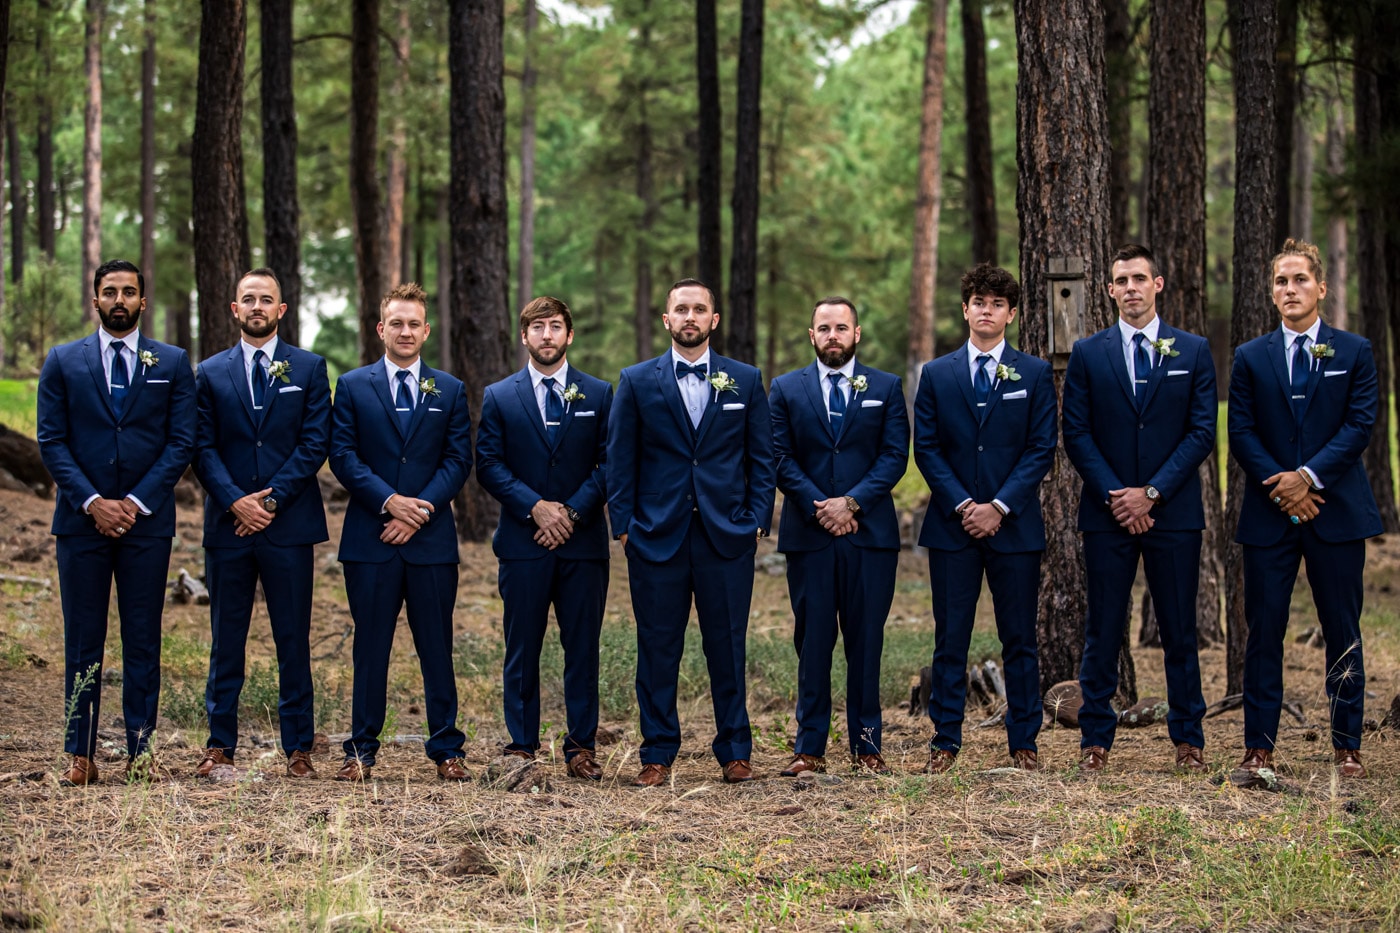 Groom and groomsmen in a line in forest